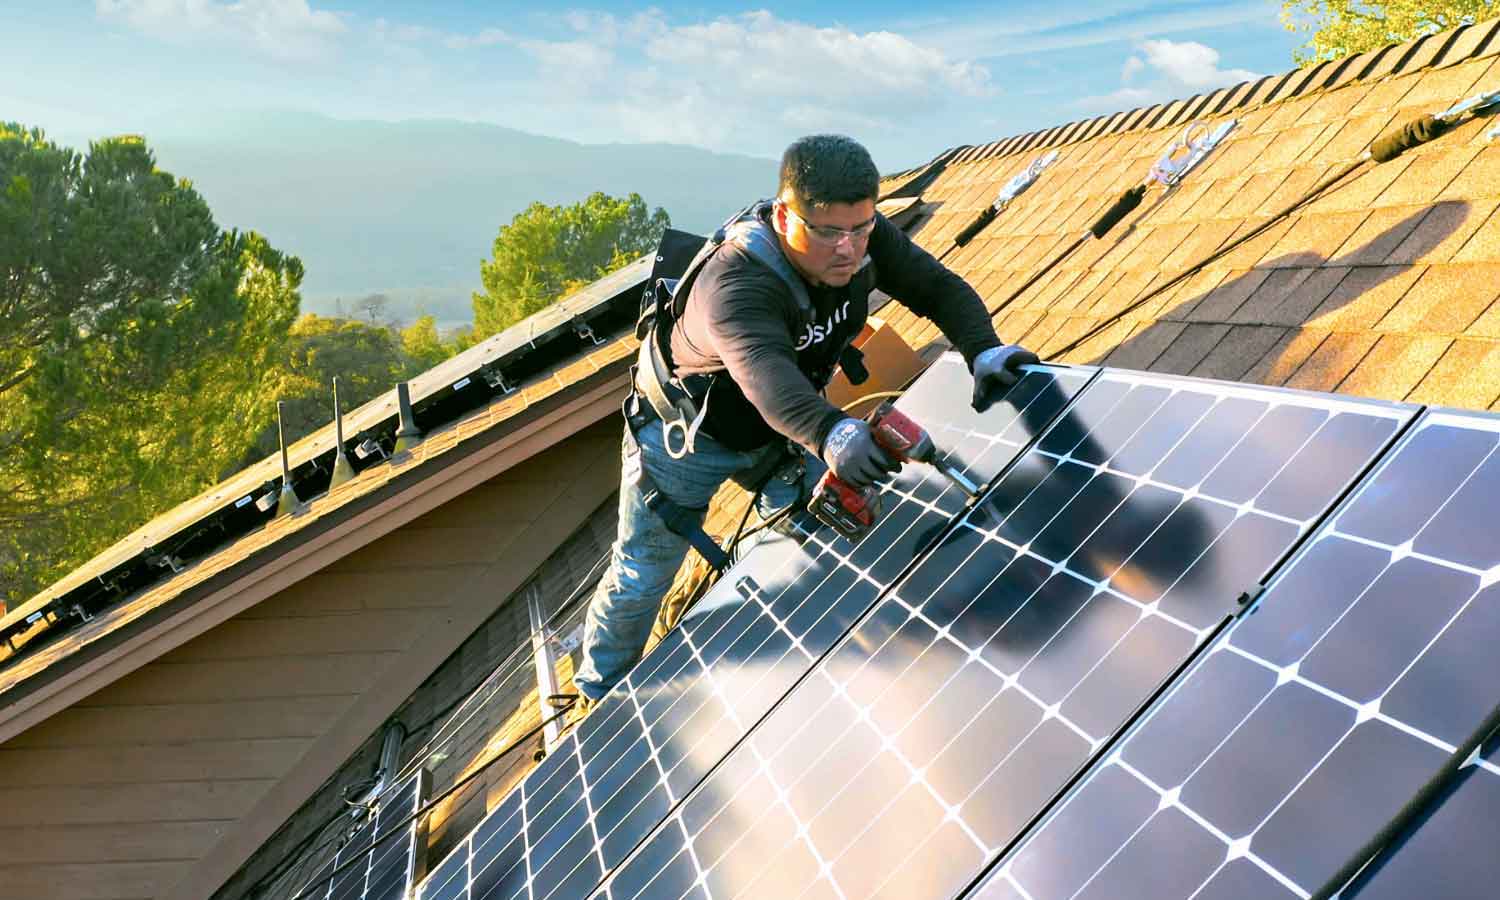 A Man Holding a Drill, Installing Solar Panels in the Roof